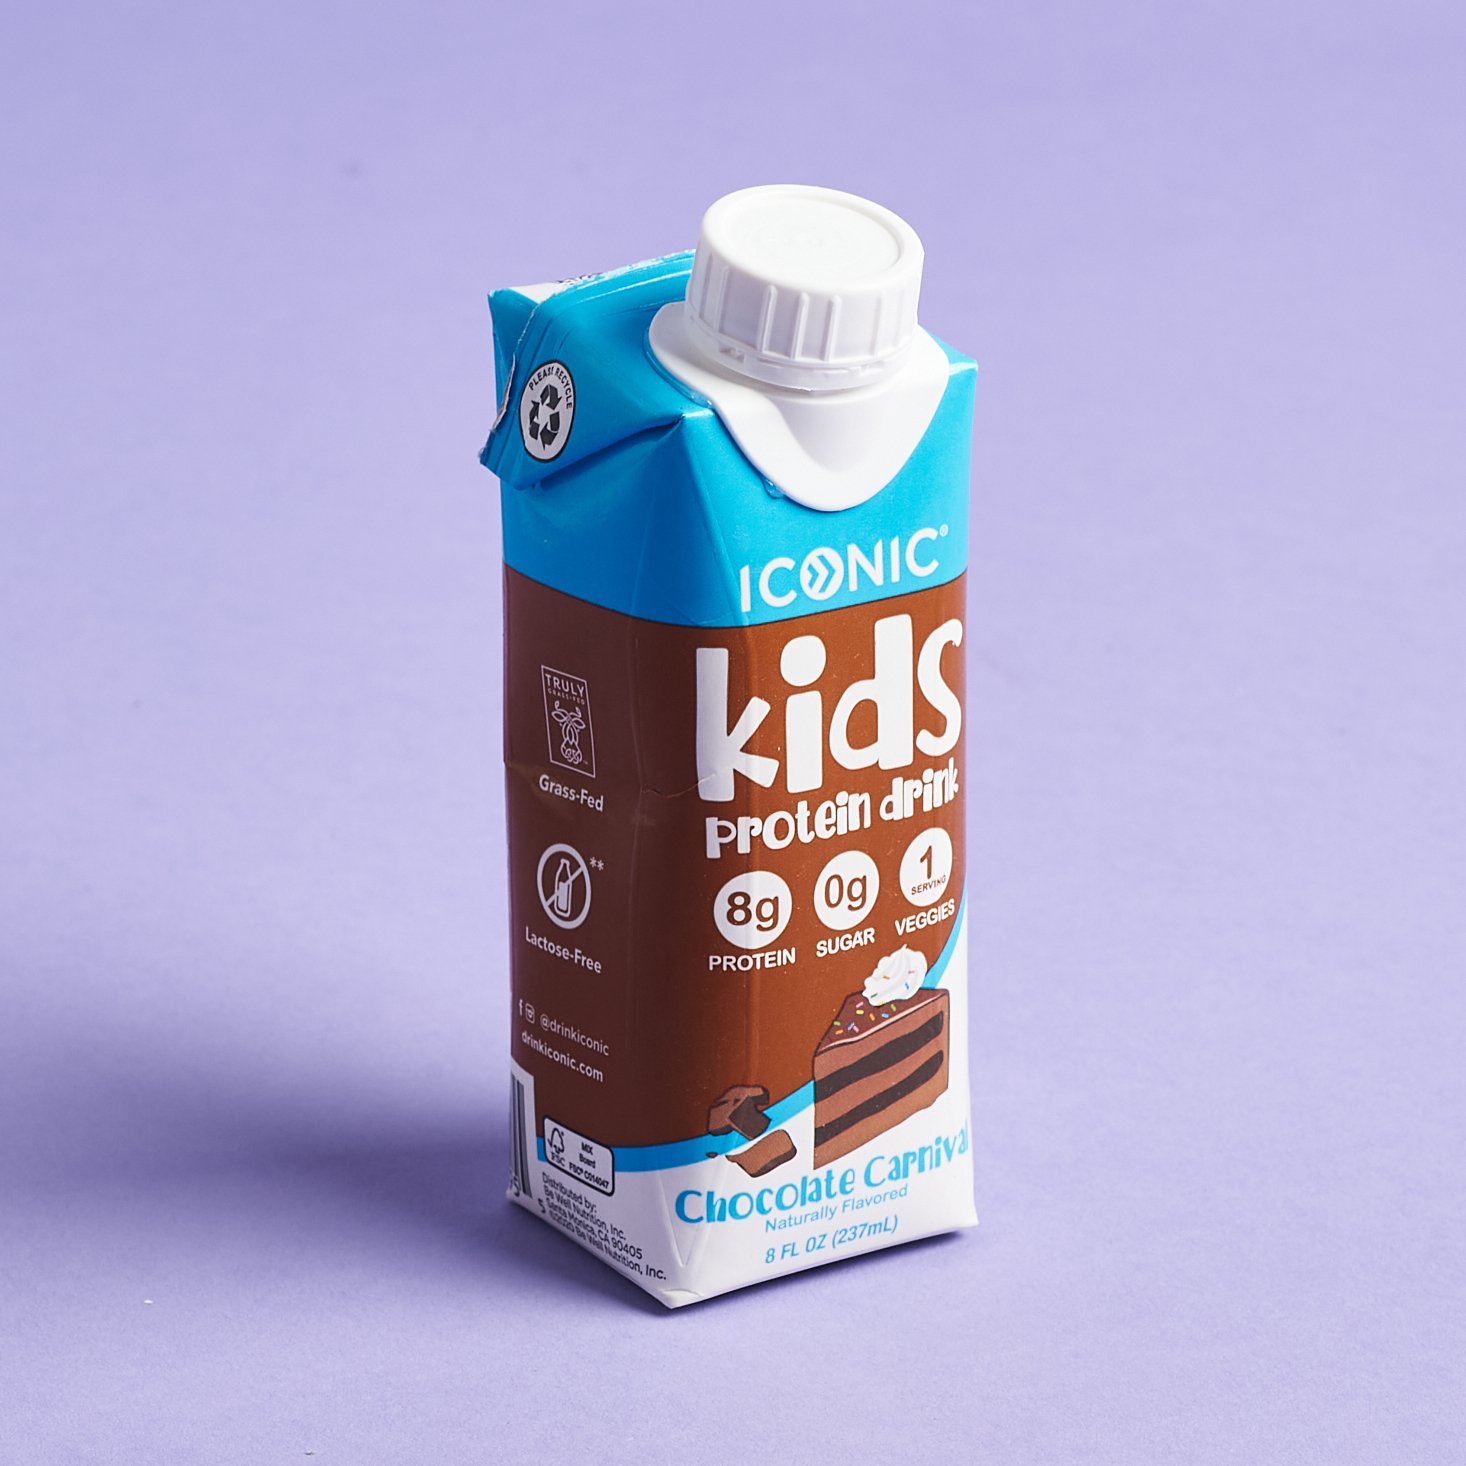 Moms and Babes Box kids protein drink